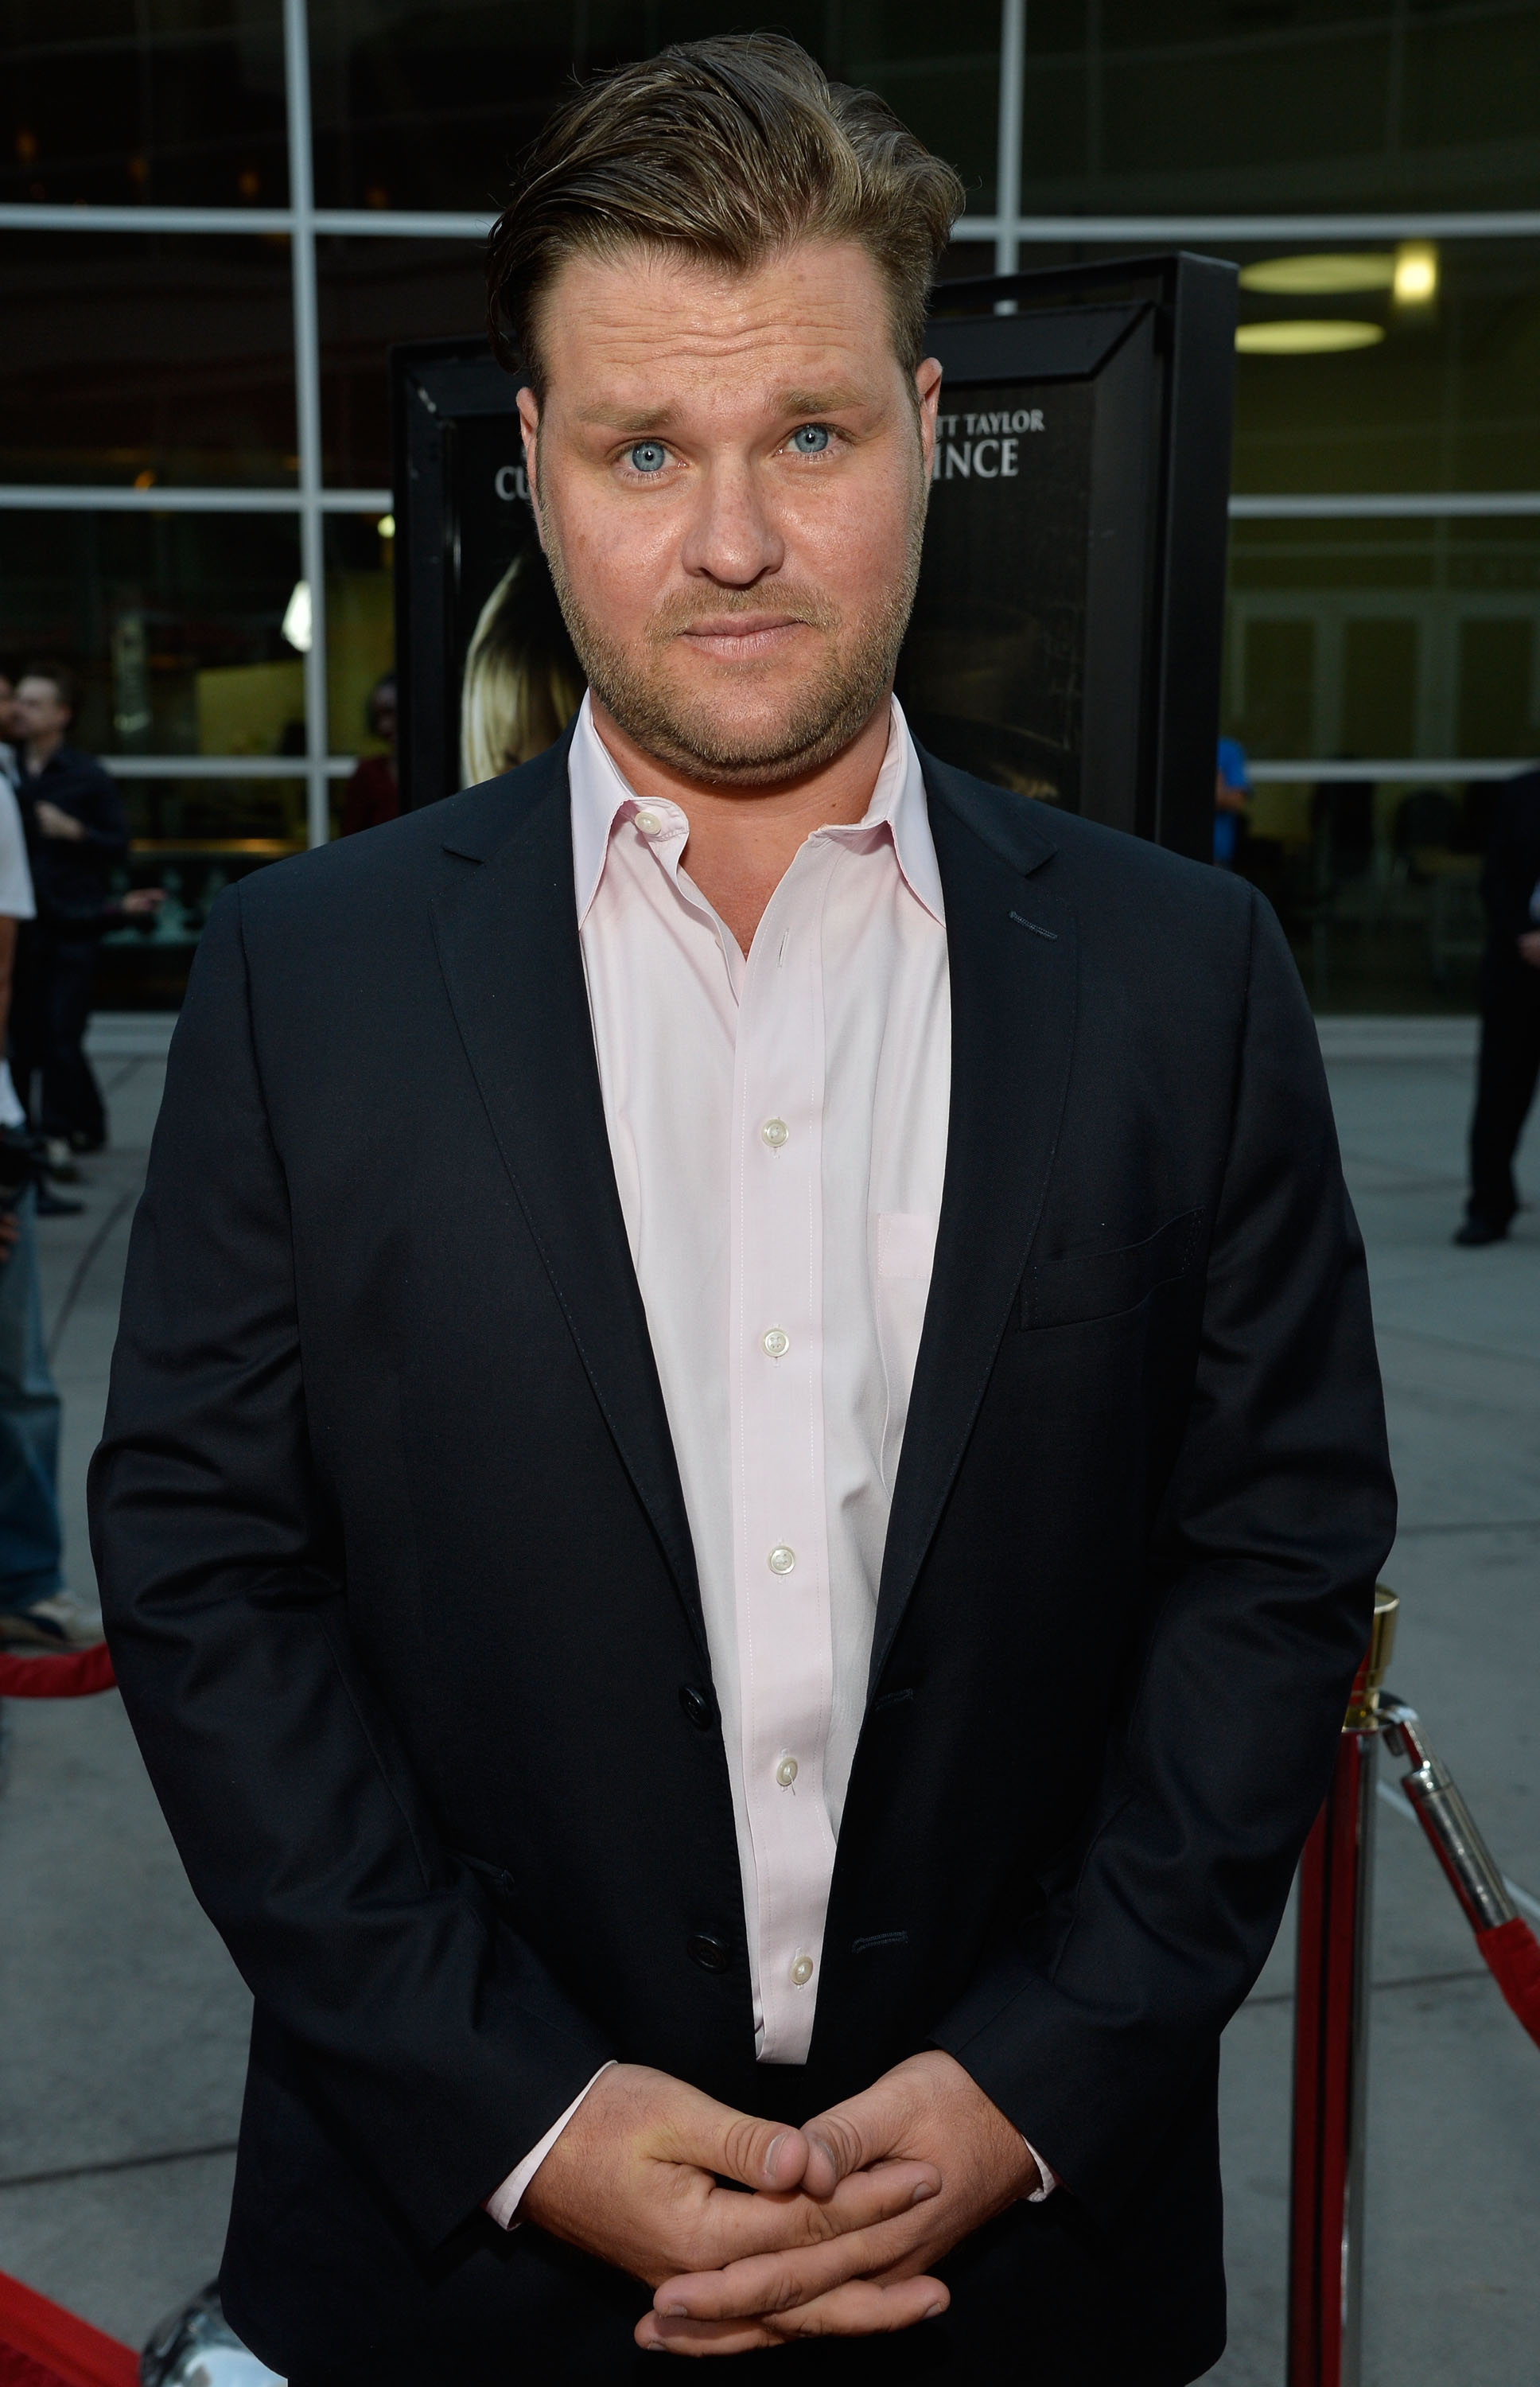 Zachery Ty Bryan on August 14, 2013 in Hollywood, California | Source: Getty Images